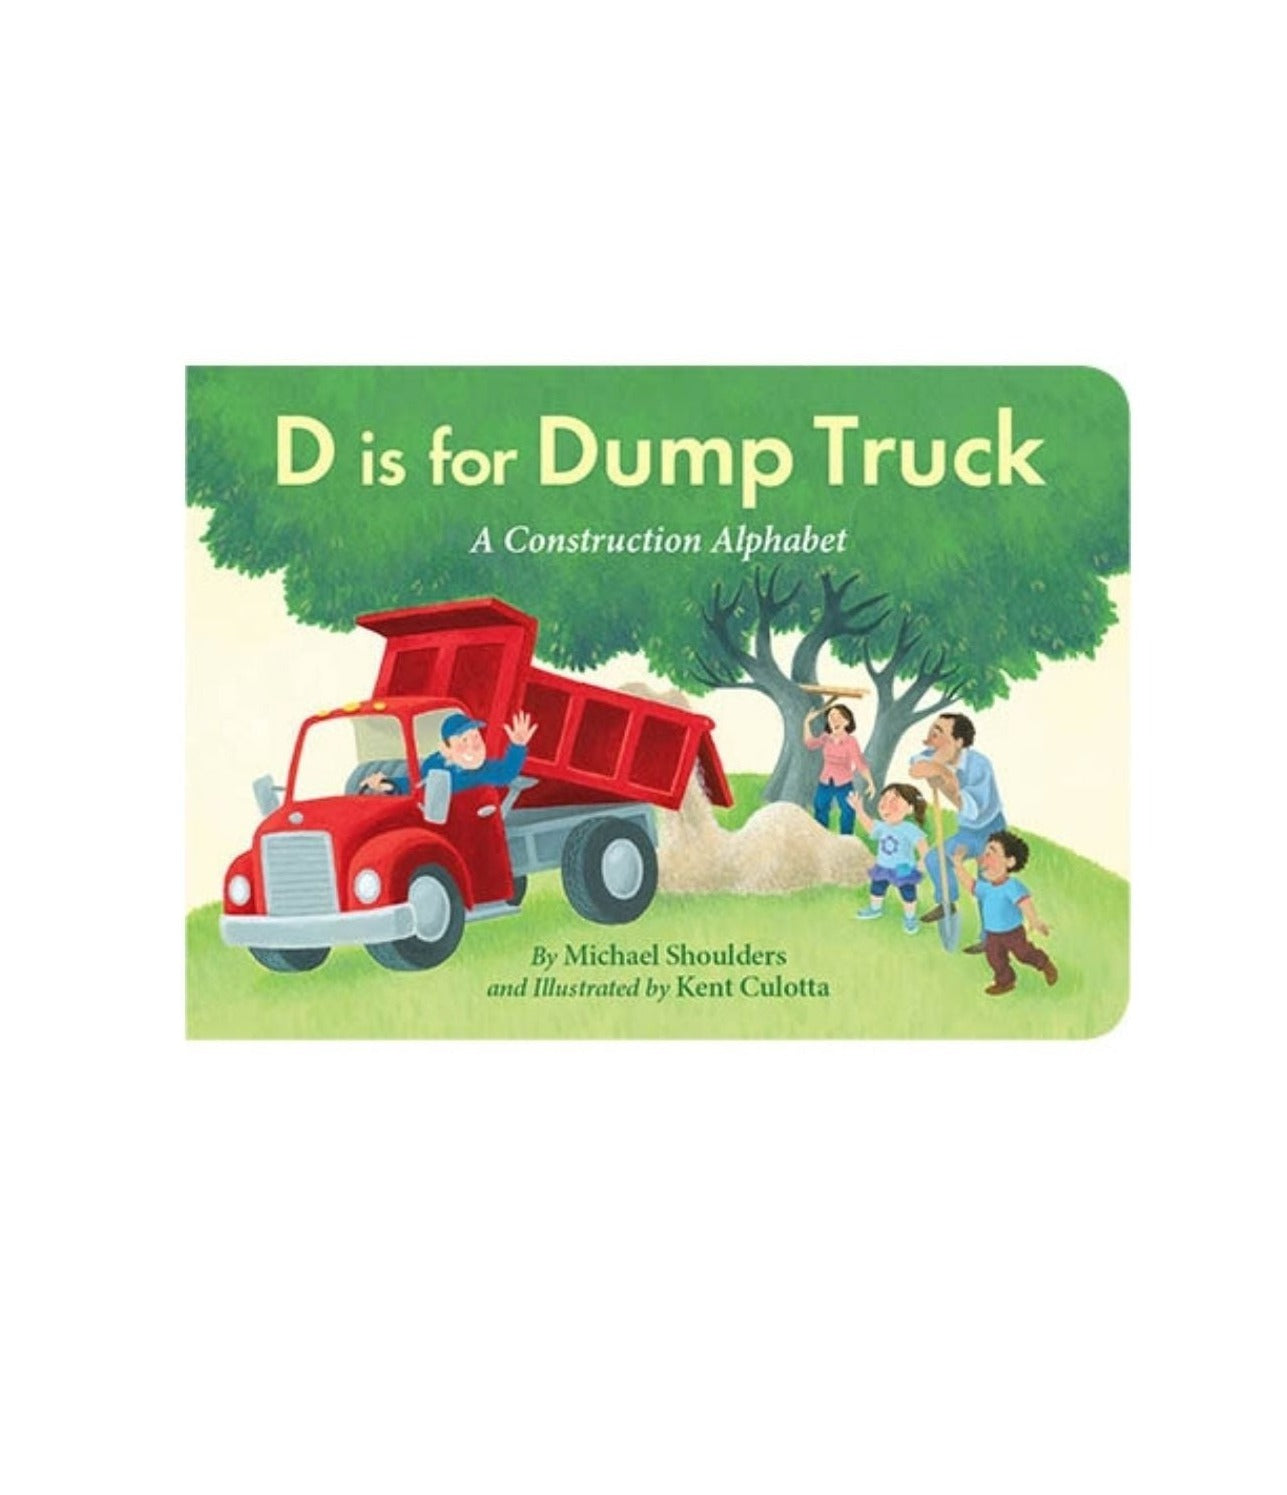 red dump truck on front with family helping out